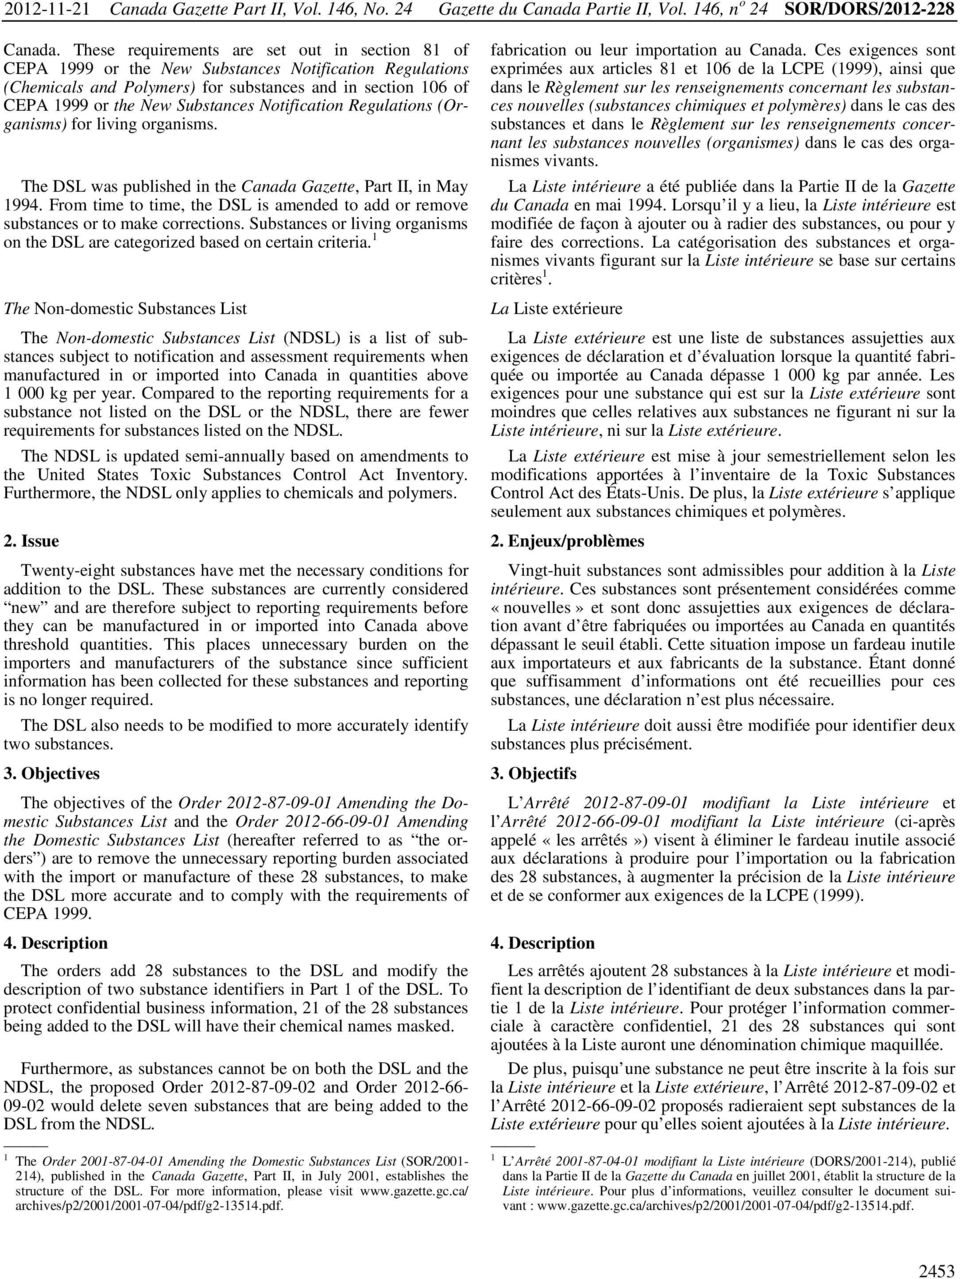 Notification Regulations (Organisms) for living organisms. The DSL was published in the Canada Gazette, Part II, in May 1994.